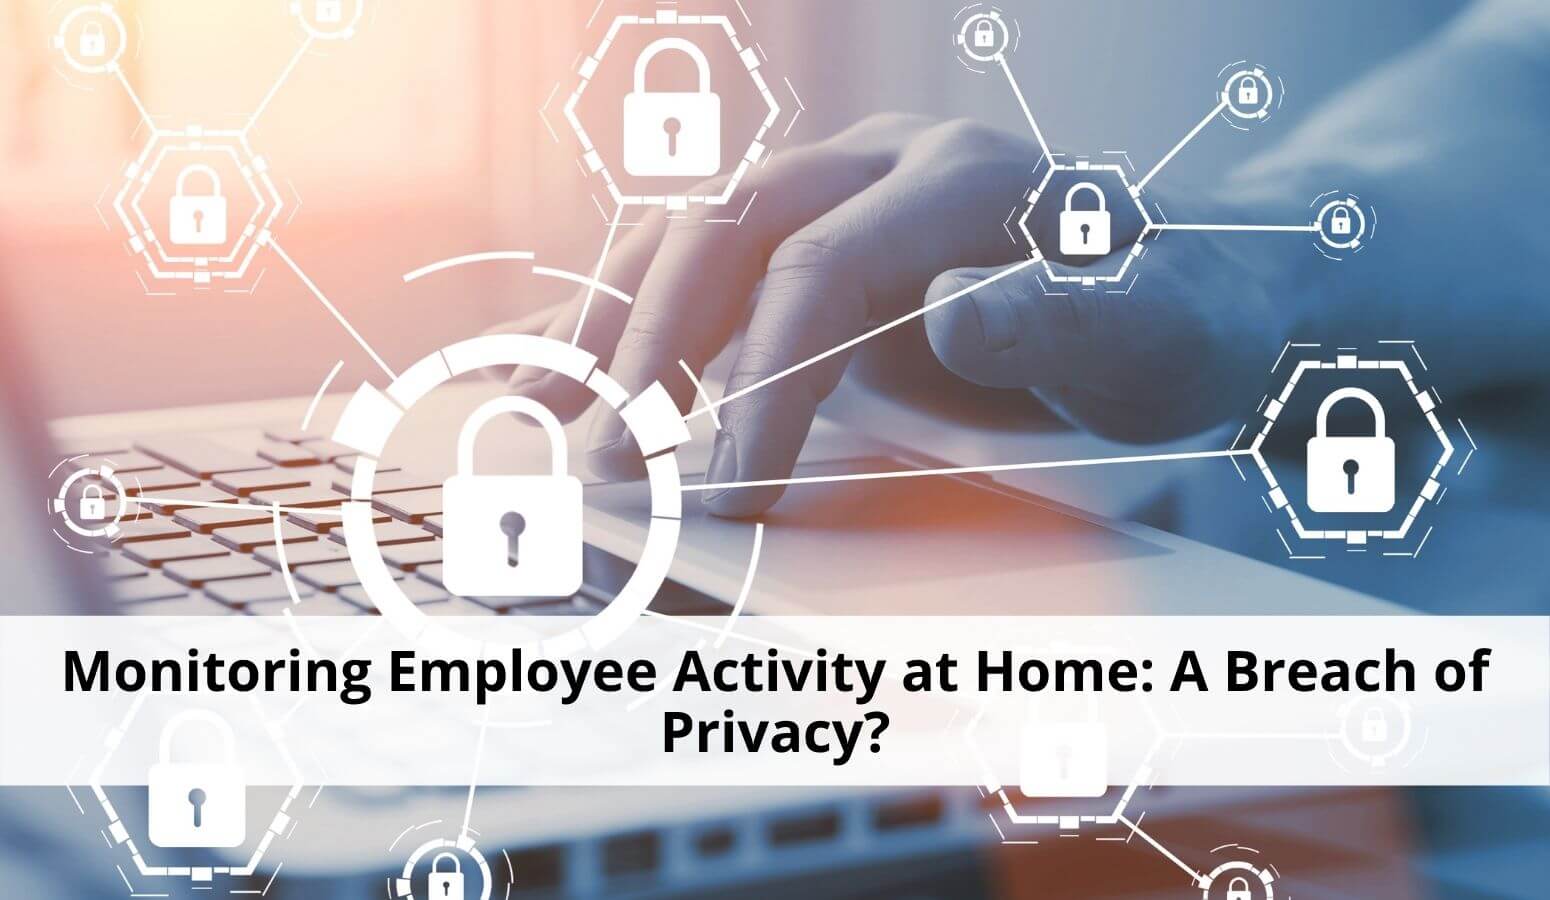 Featured image for “Monitoring Employee Activity at Home: A Breach of Privacy?”